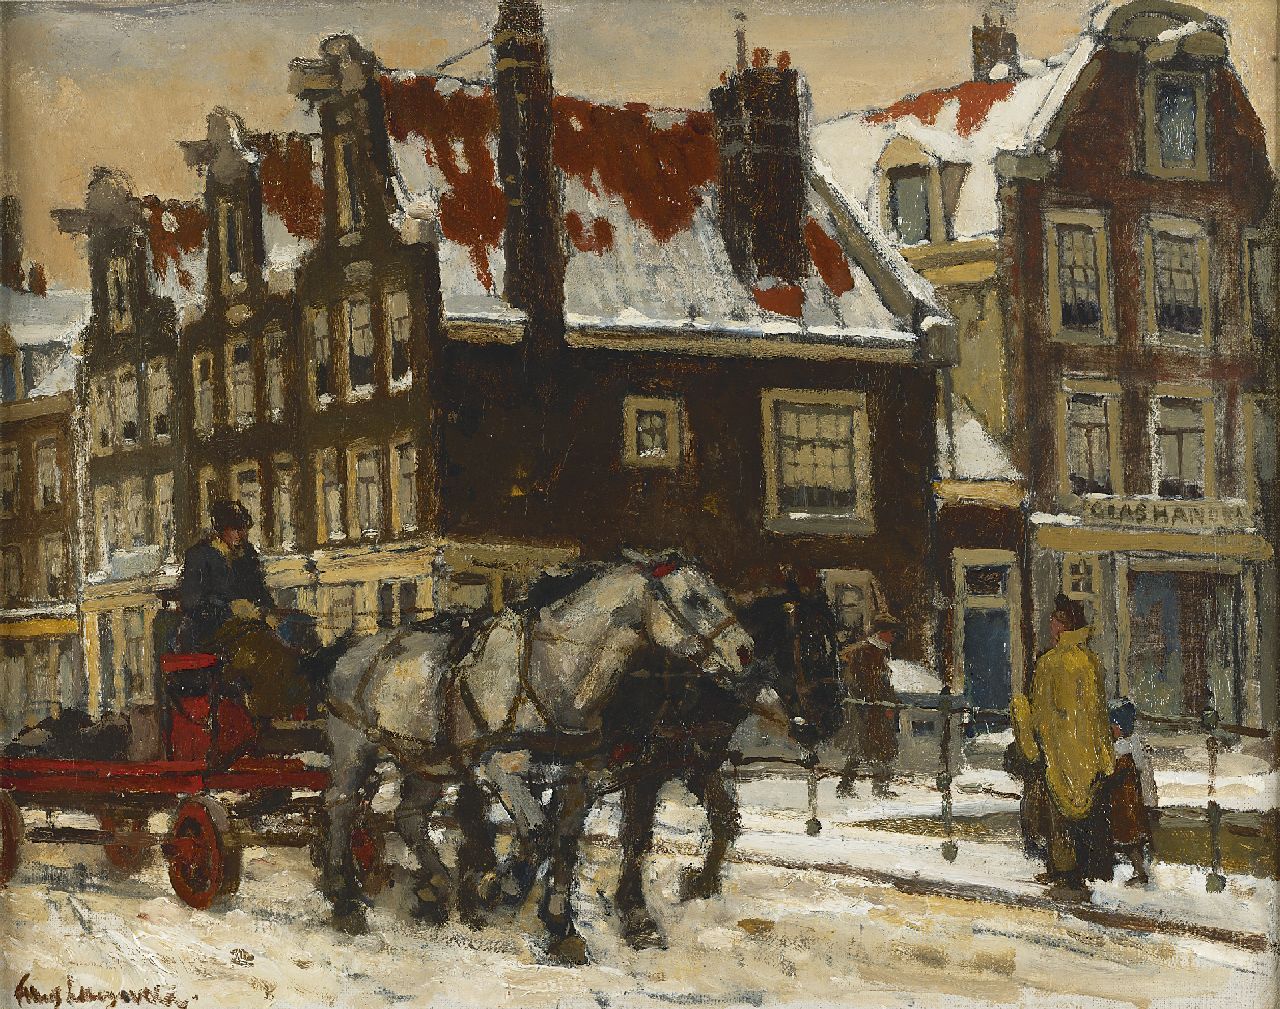 Langeveld F.A.  | Franciscus Arnoldus 'Frans' Langeveld, A horse drawn cart on a bridge in wintry Amsterdam, oil on canvas 37.8 x 47.5 cm, signed l.l.